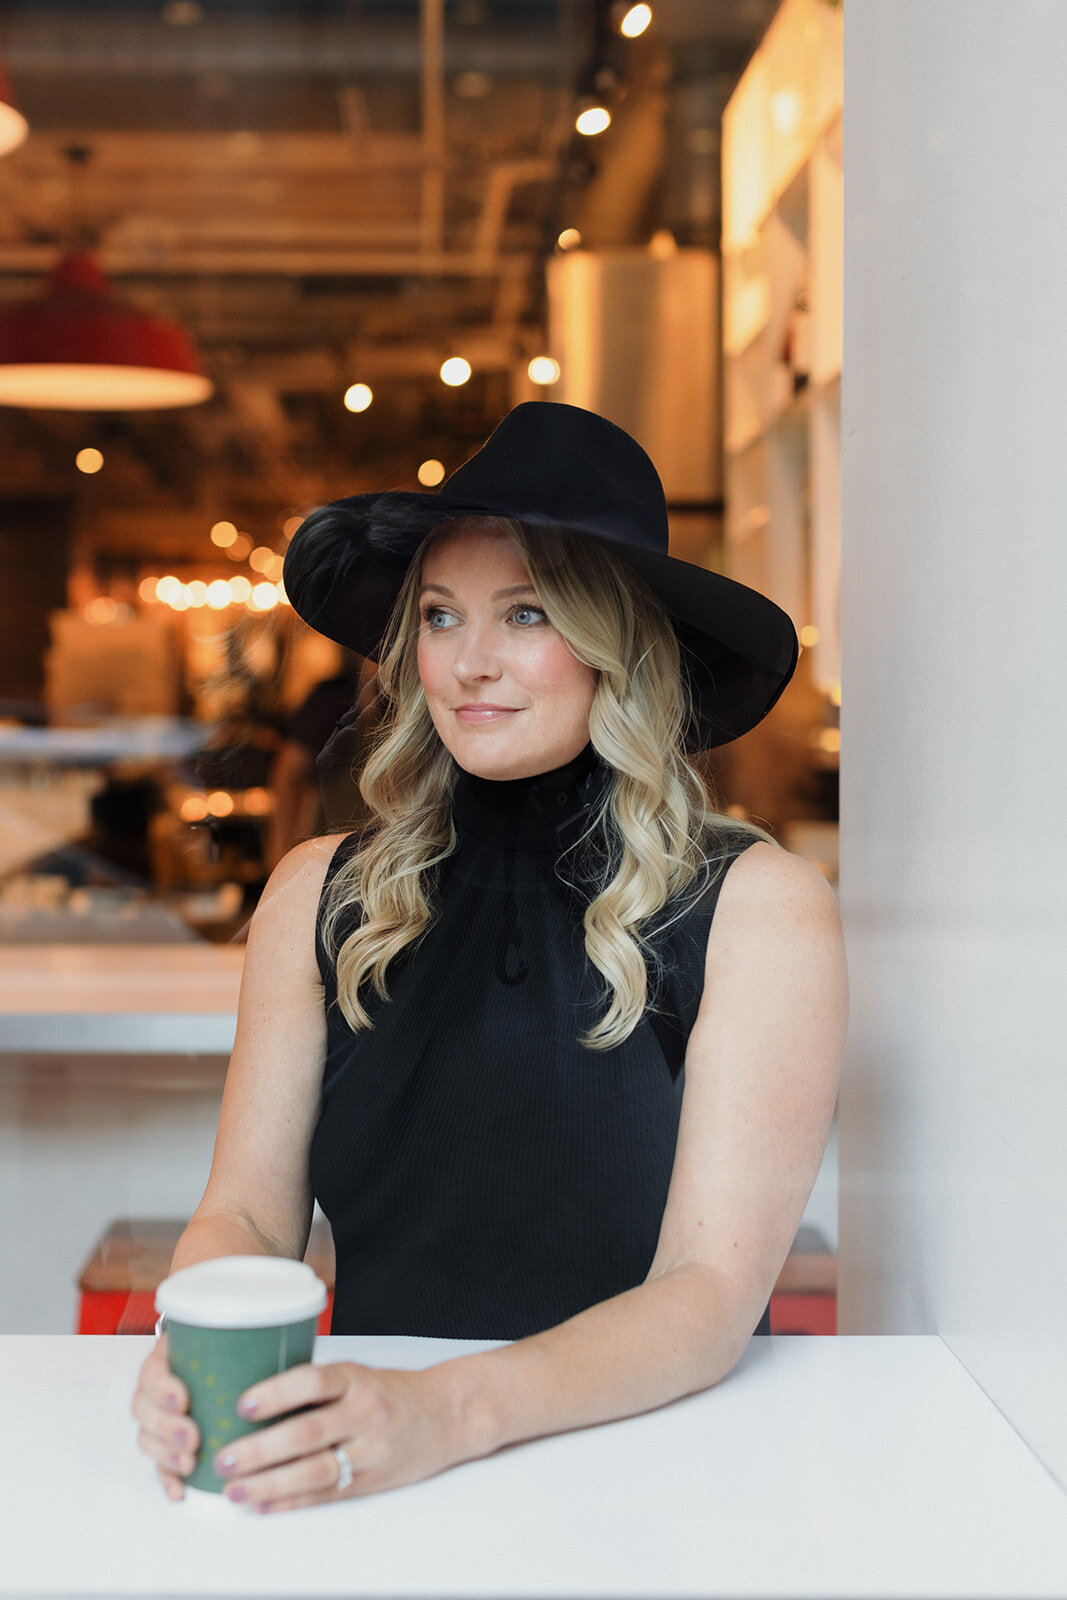 blonde woman in black sleeveless top and black fedora holding green cup of tea. She looks out window, photo is shot through glass so there are some street reflections in glass.